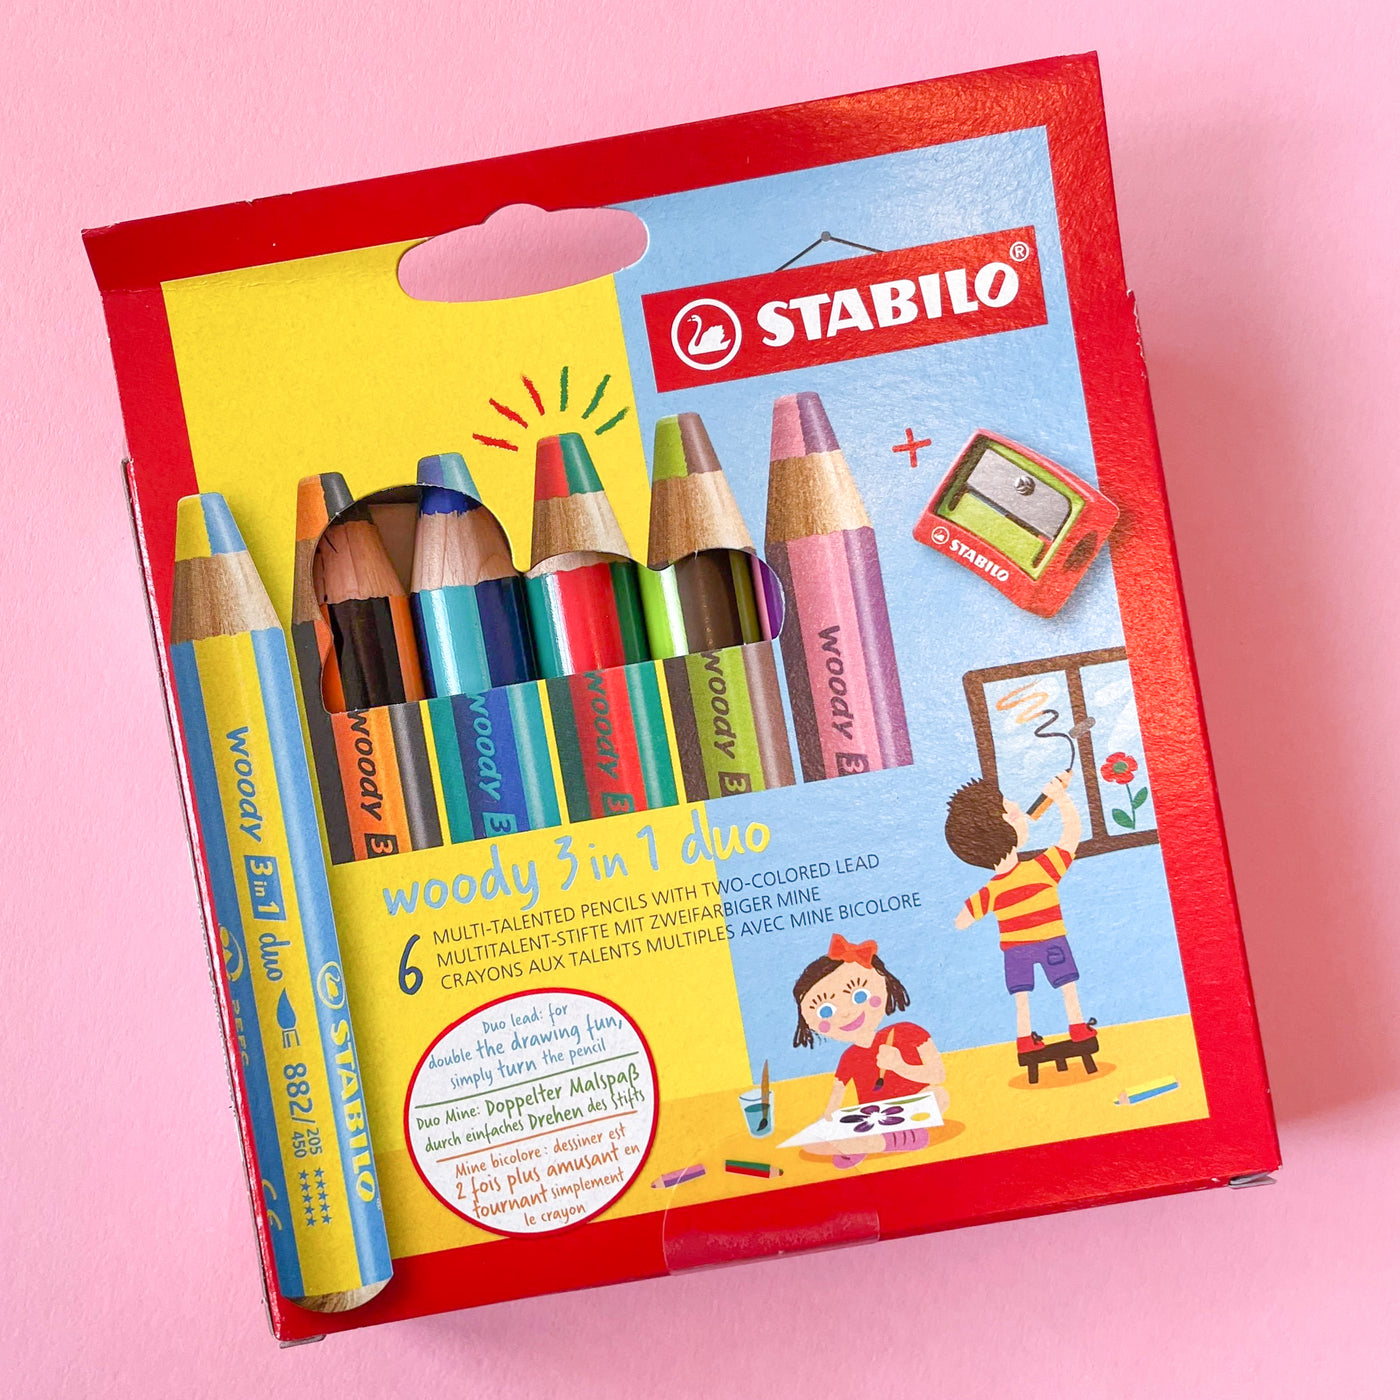 Stabilo Woody 3 in 1 Pencils in Pastels: Watercolor, Pencil and